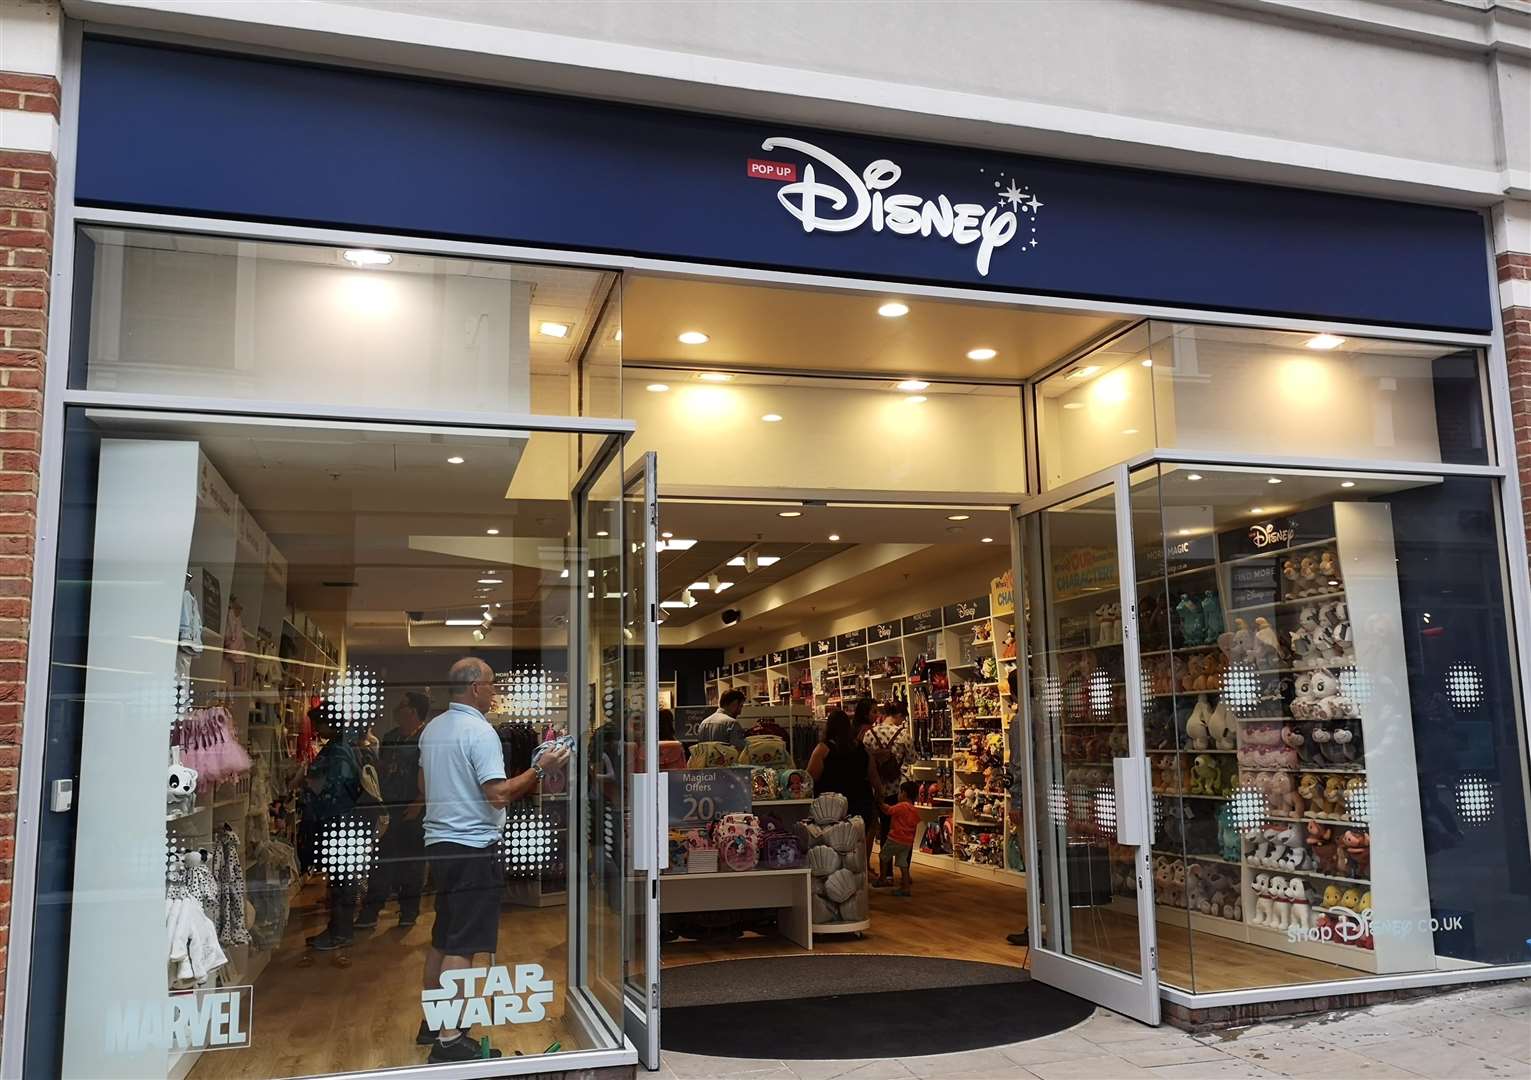 The pop-up DIsney store has opened in Canterbury